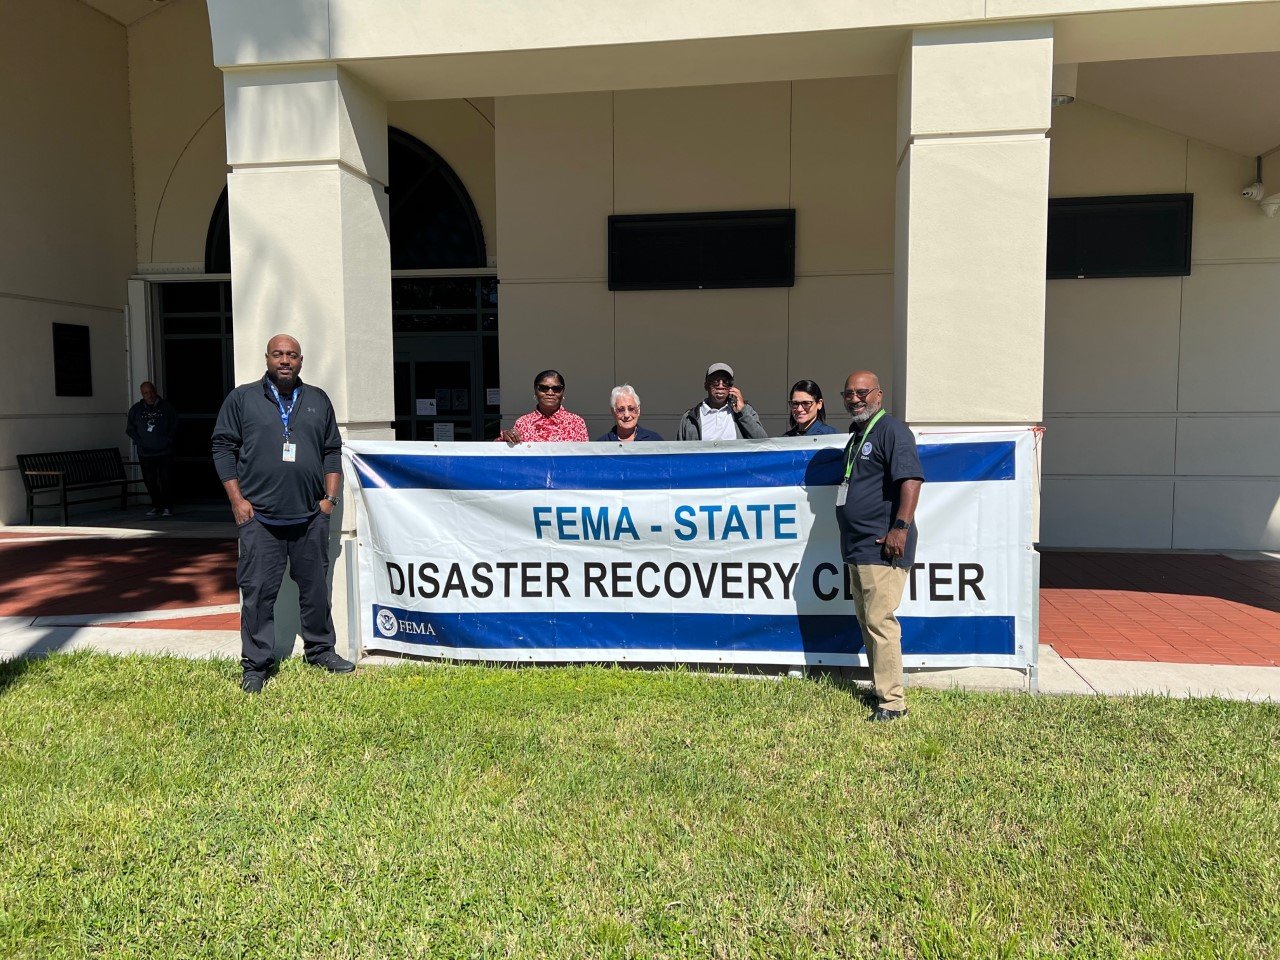 OKEECHOBEE -- FEMA representatives will be at the Okeechobee County Public Library from 9 a.m. to 6 p.m., seven days a week, so long as their help is needed.